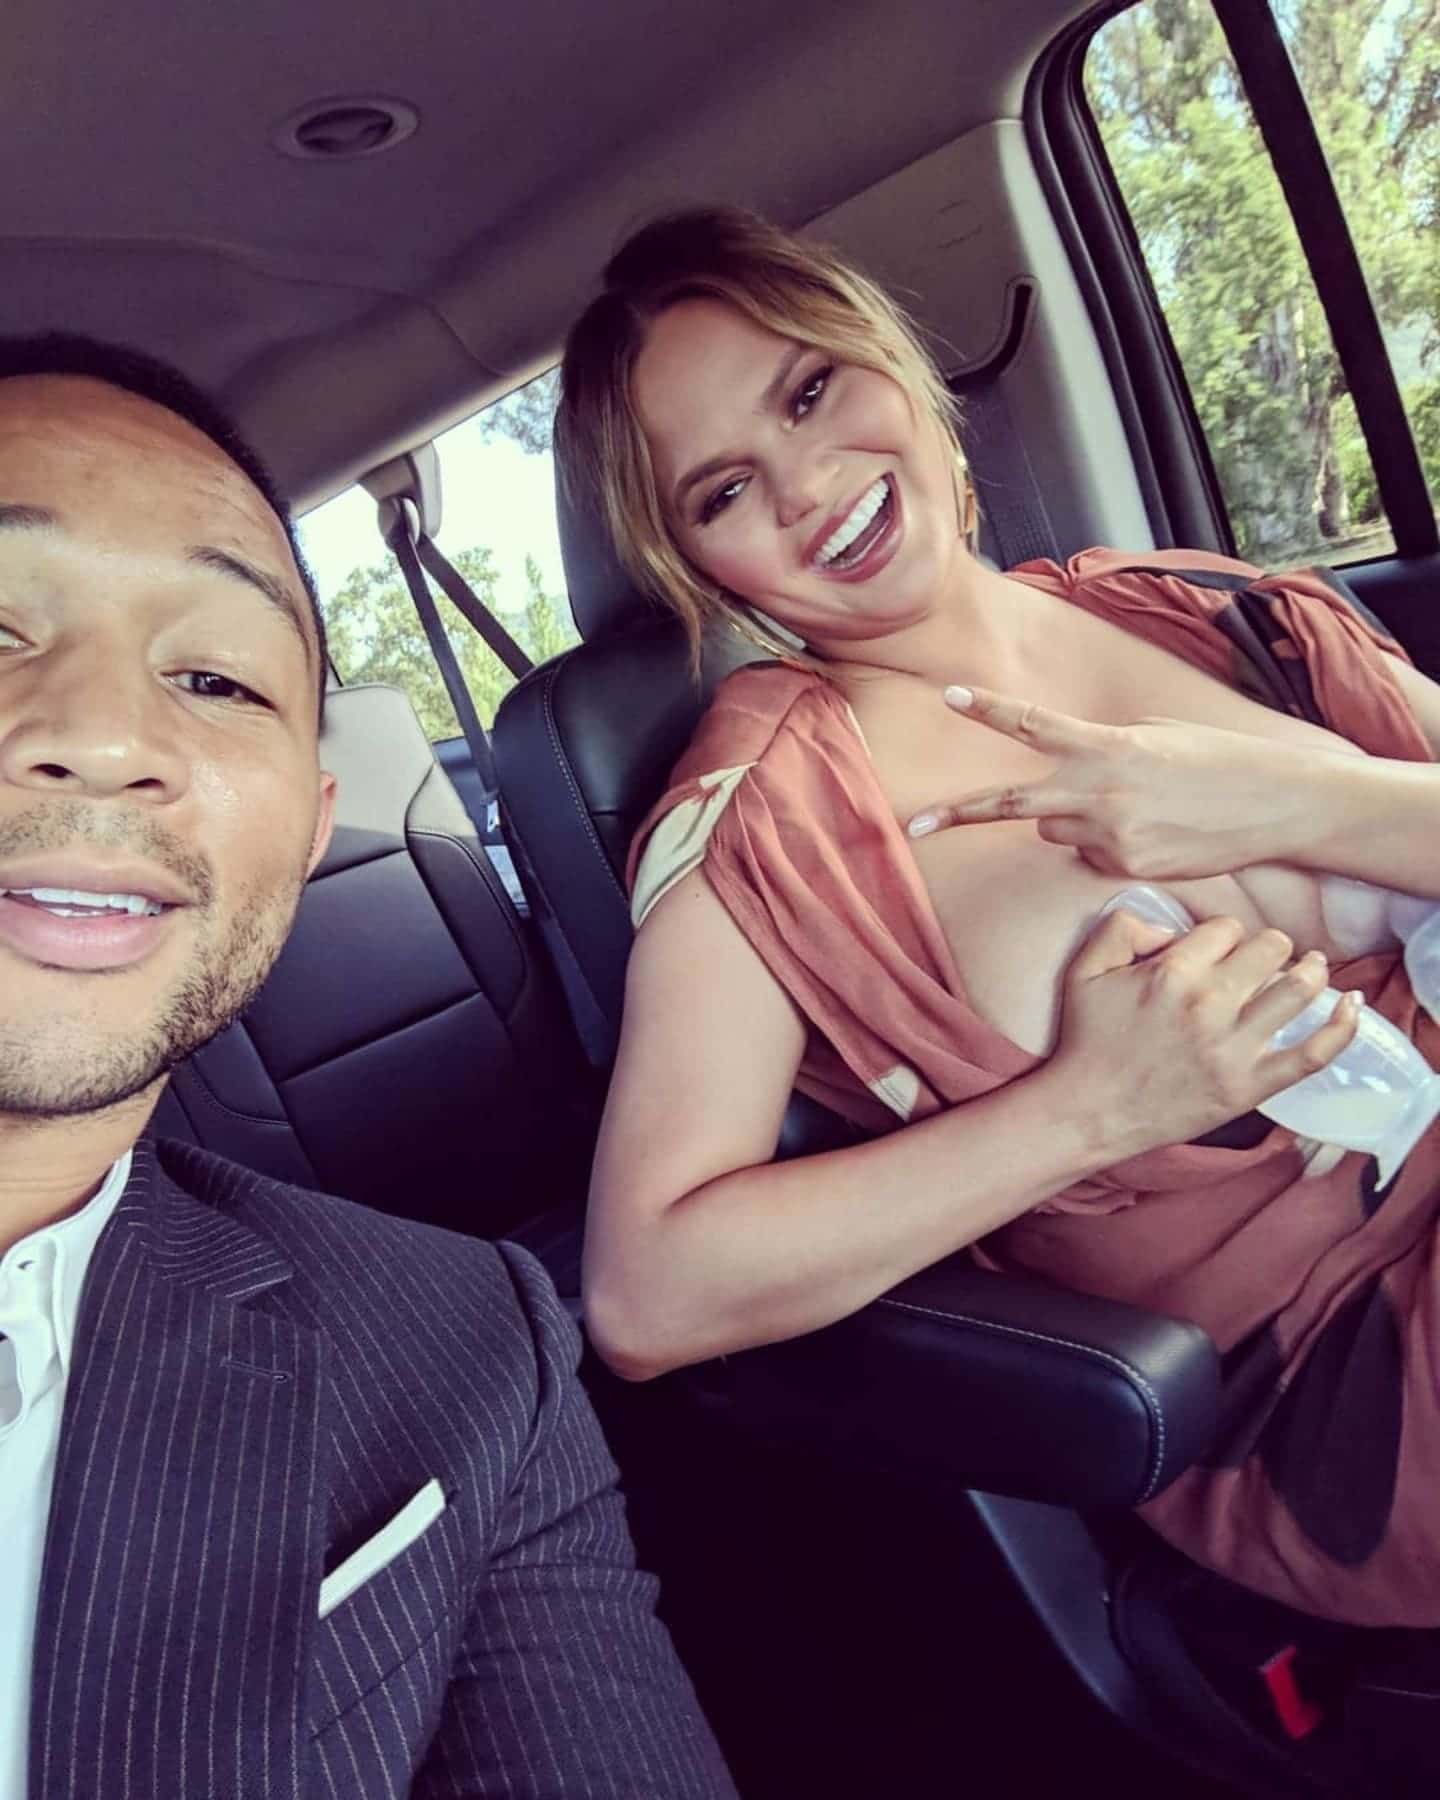 chrissy teigen using breast pumps in car proves mamas are always multi tasking featured Motherly